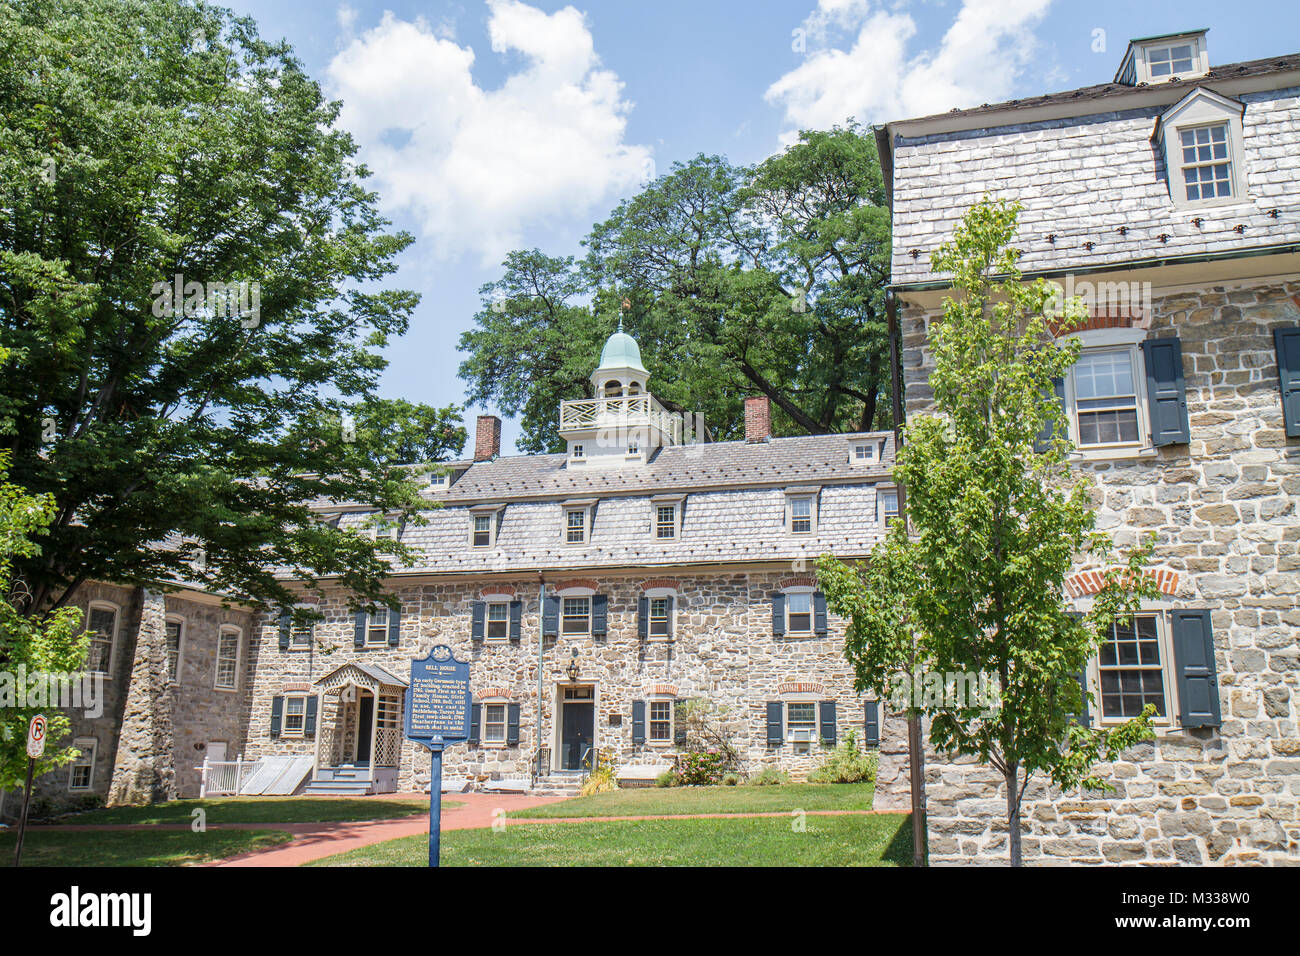 Bethlehem Pennsylvania,Colonial America,Moravian community,religious settlement,Bell House,building,stone,architecture marker,roof dormers,turret,PA10 Stock Photo